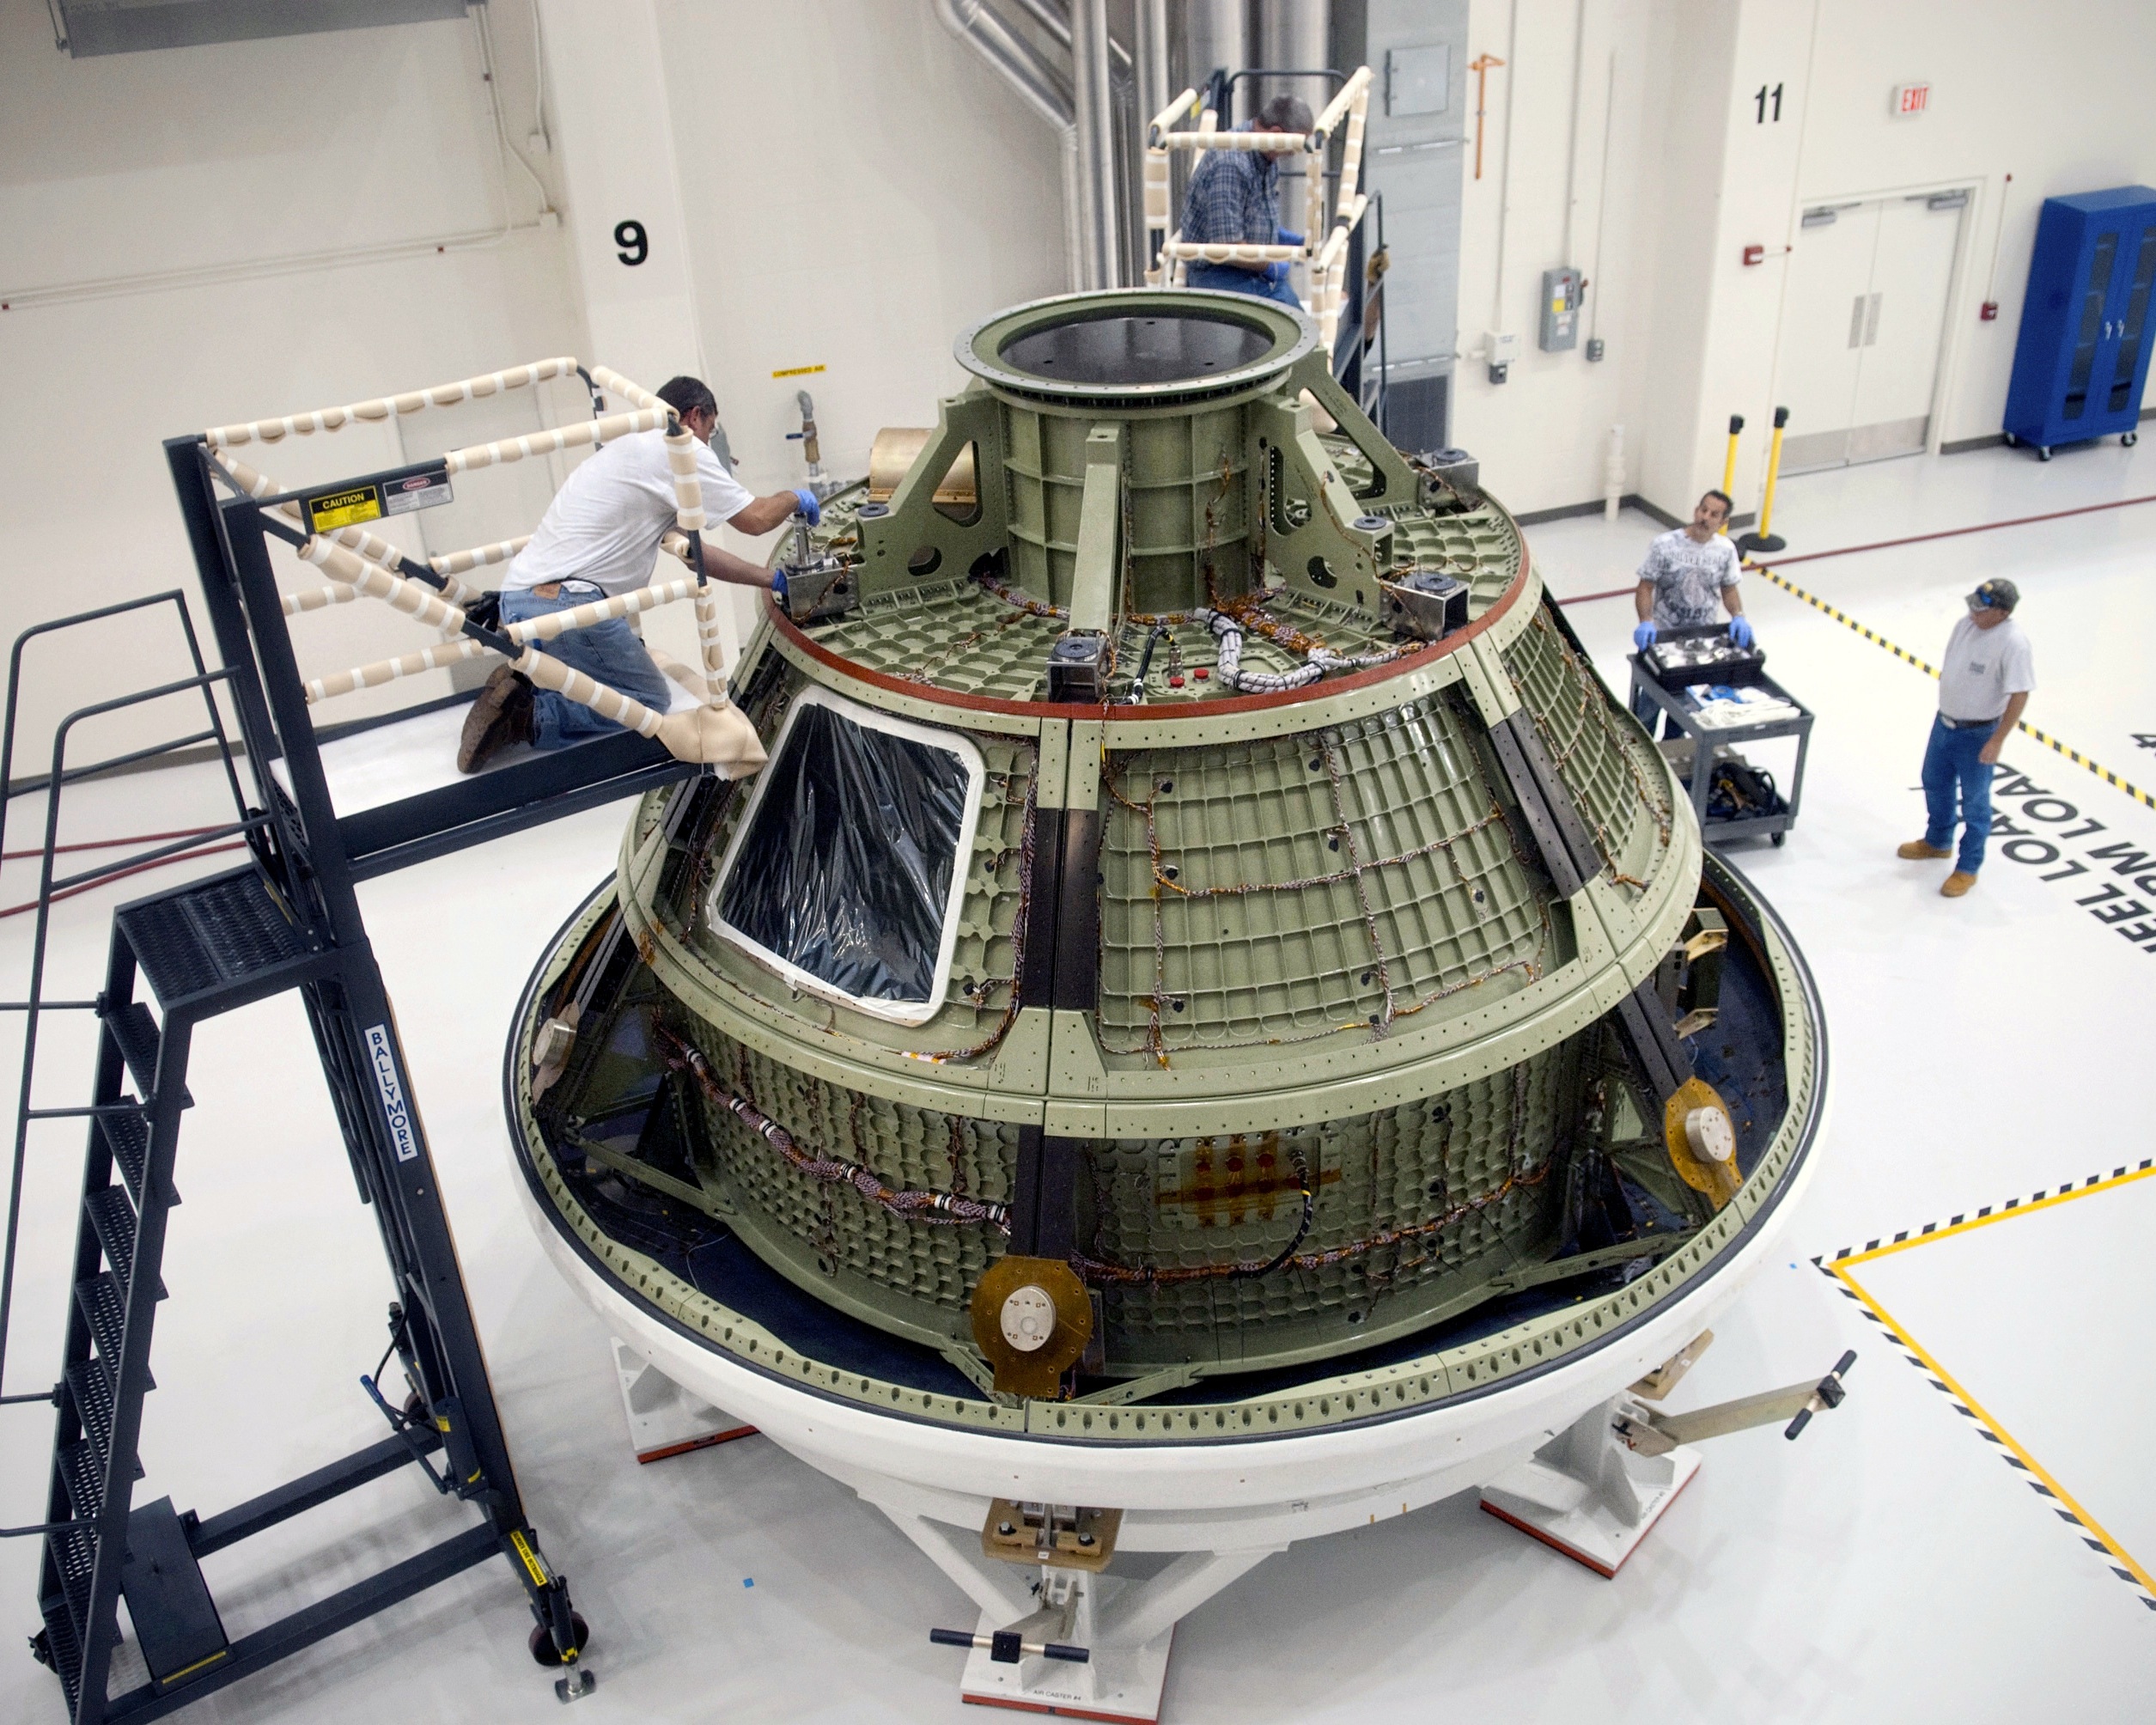 Modal testing at NASA's Kennedy Space Centre on the Orion Ground Test Vehicle